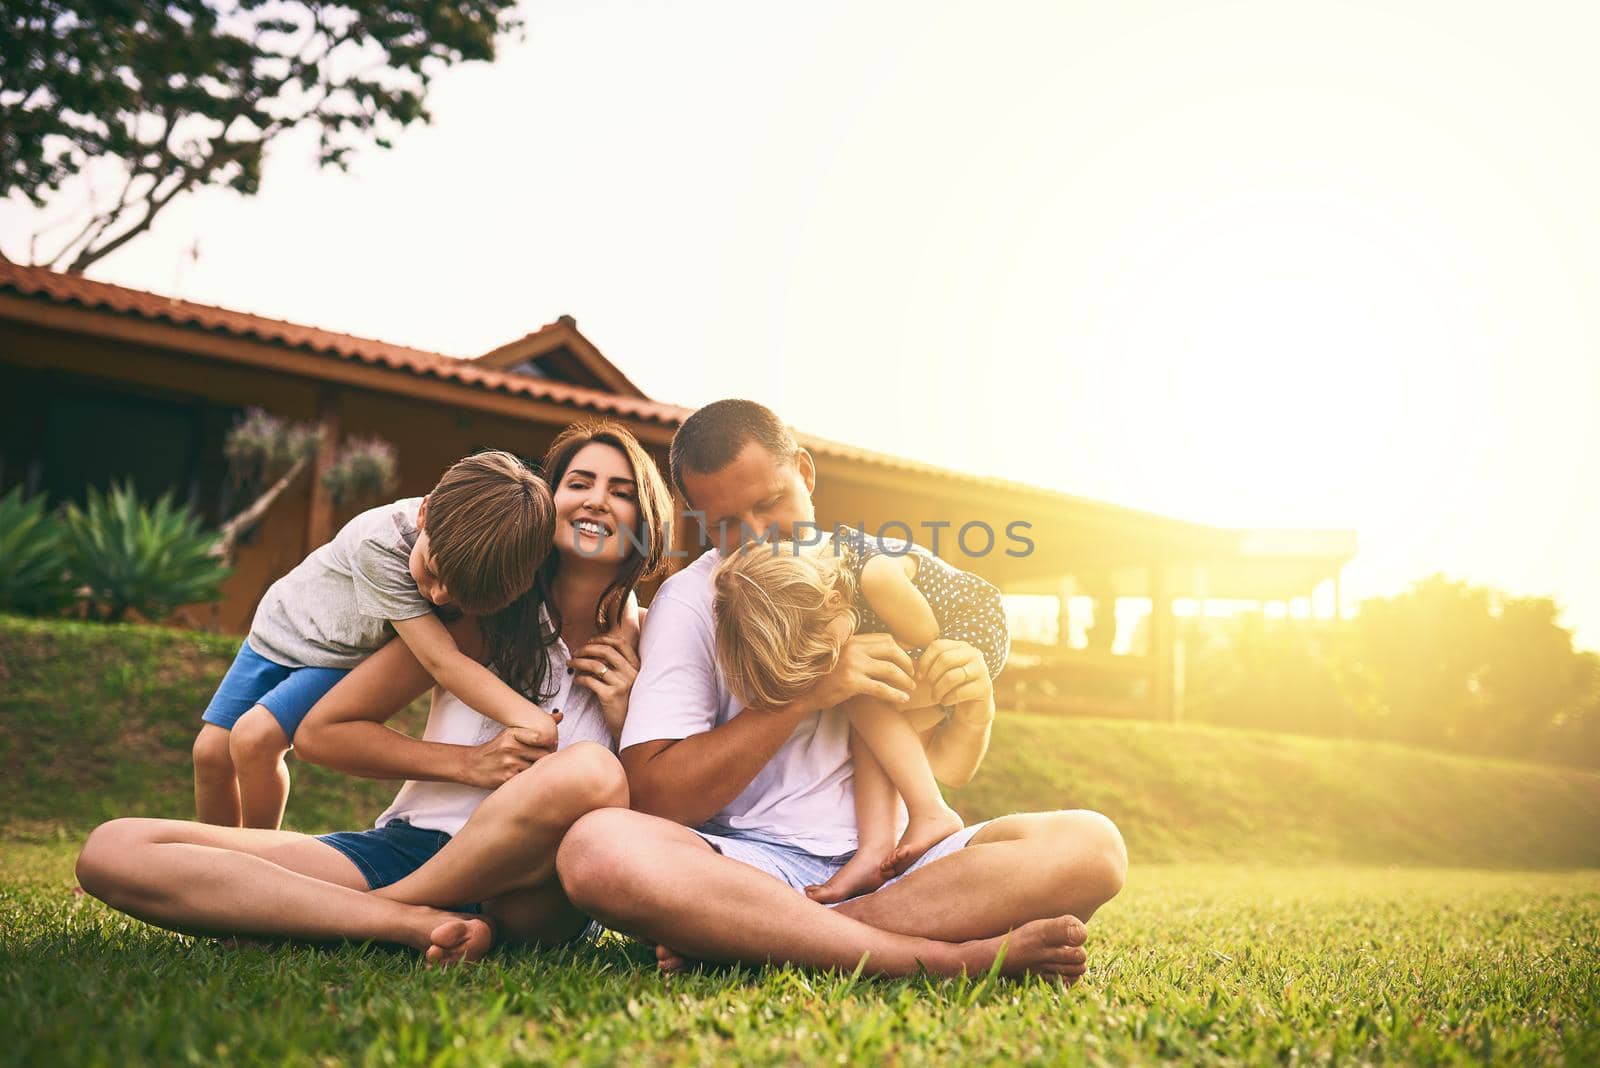 Every moment spent together is absolute bliss. Shot of a happy family bonding together outdoors. by YuriArcurs